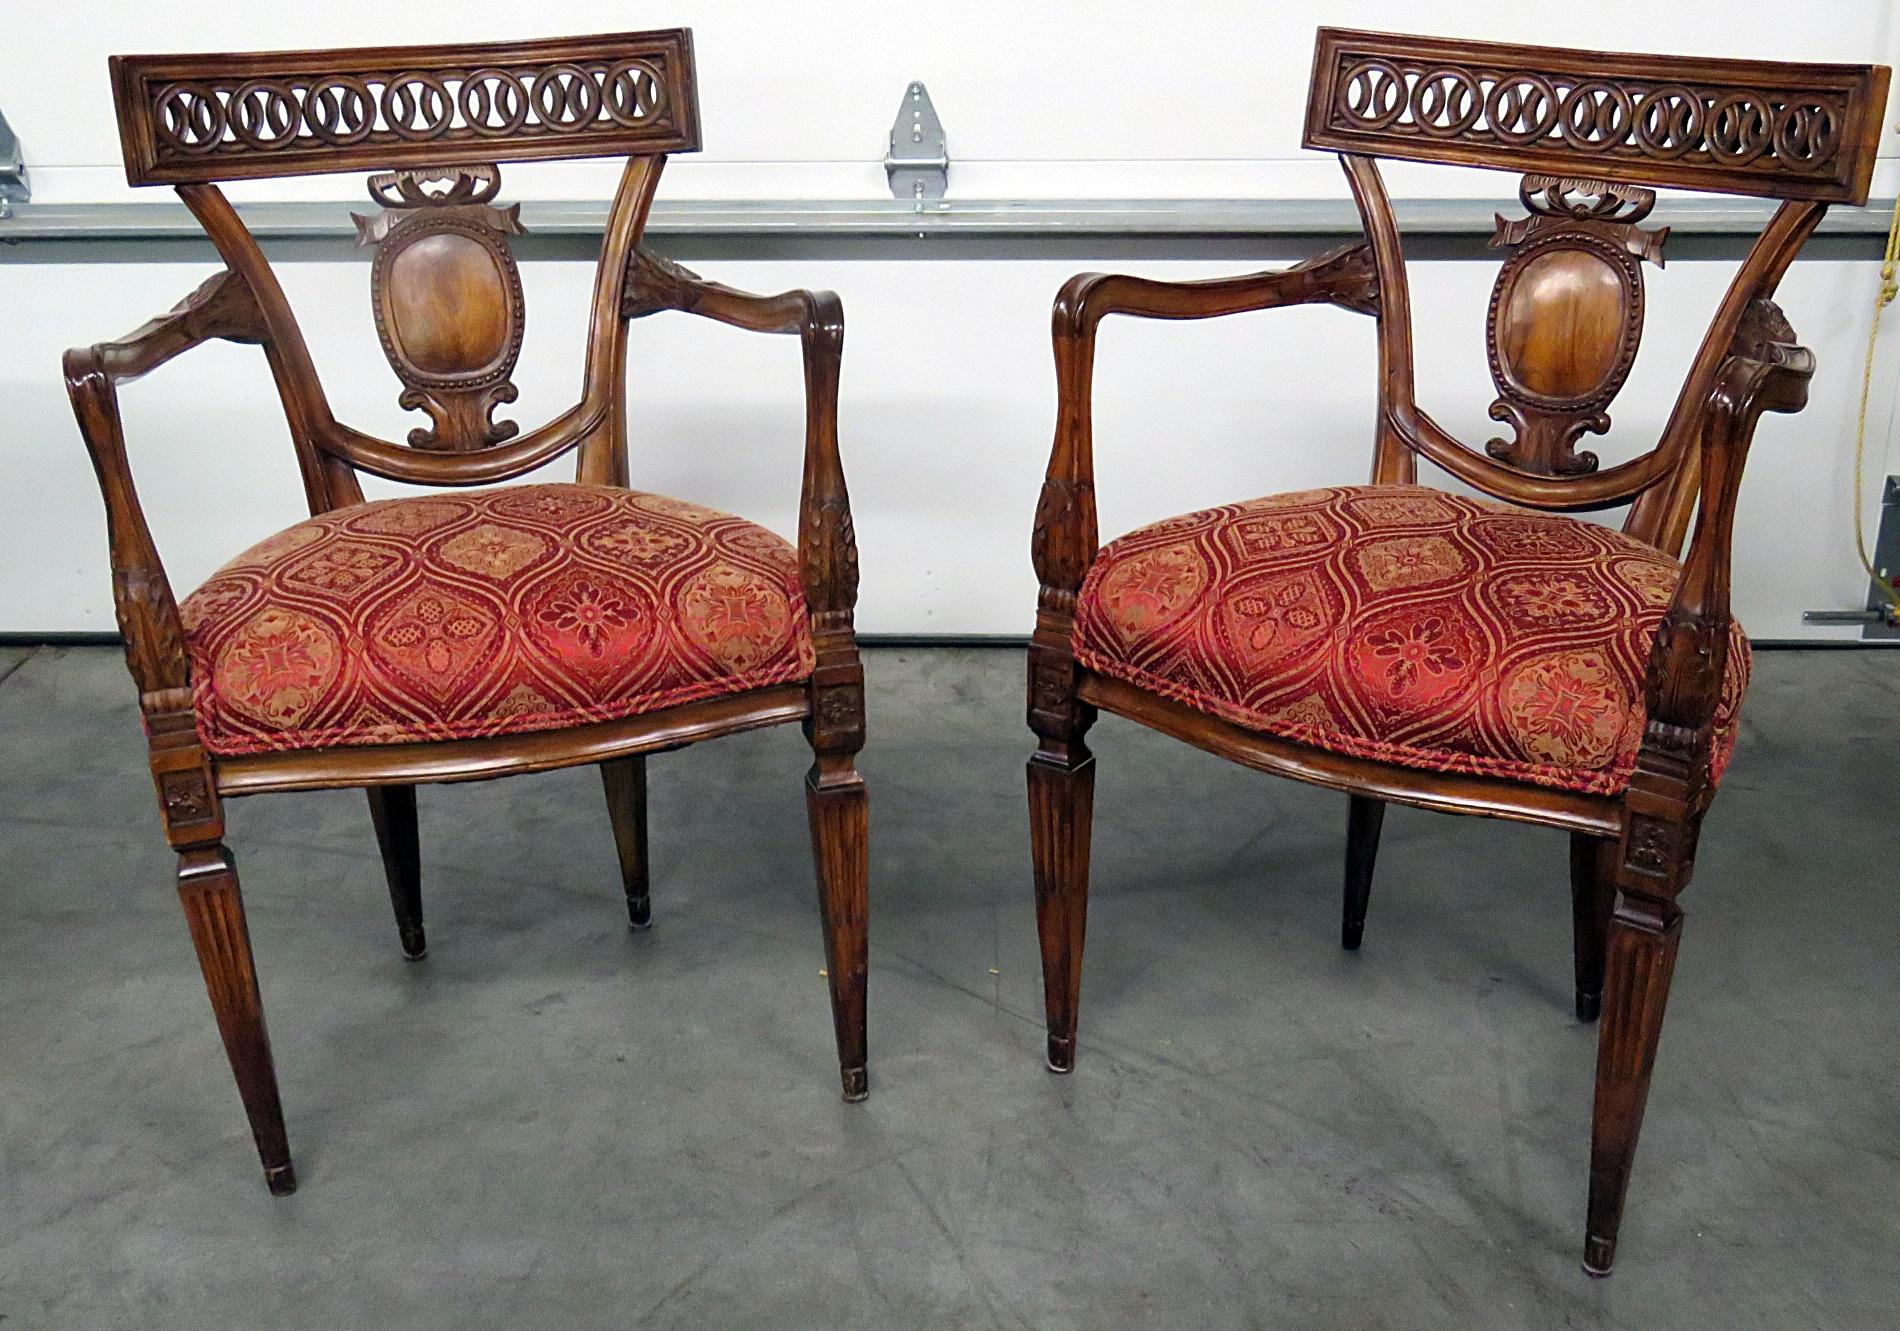 Pair of Louis XVI style carved armchairs.